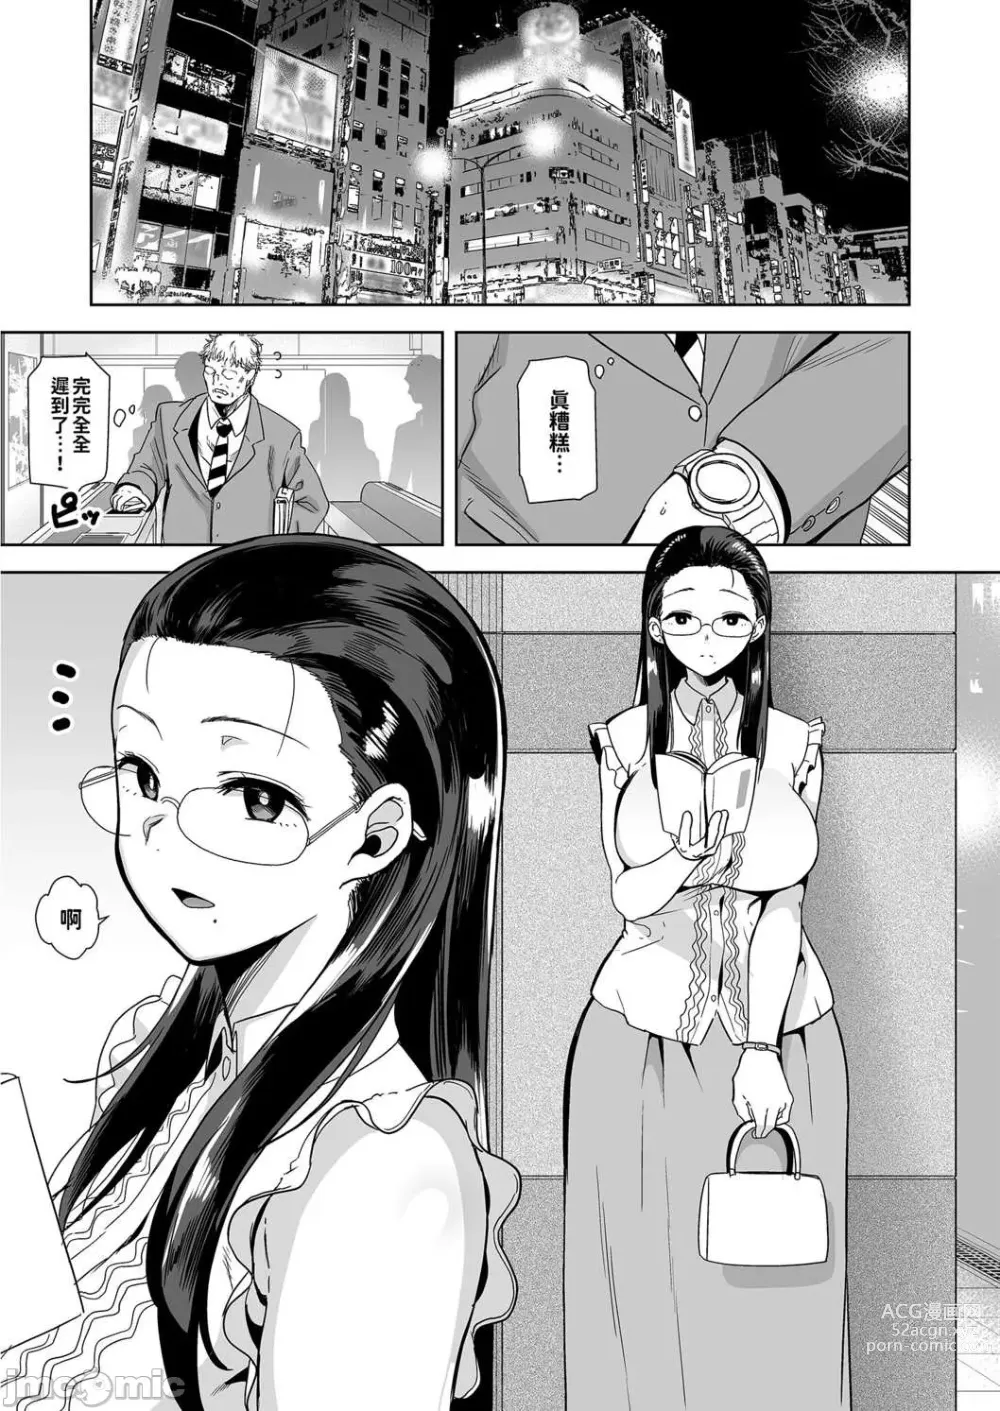 Page 4 of doujinshi 聖華女学院高等部公認竿おじさん 1-6